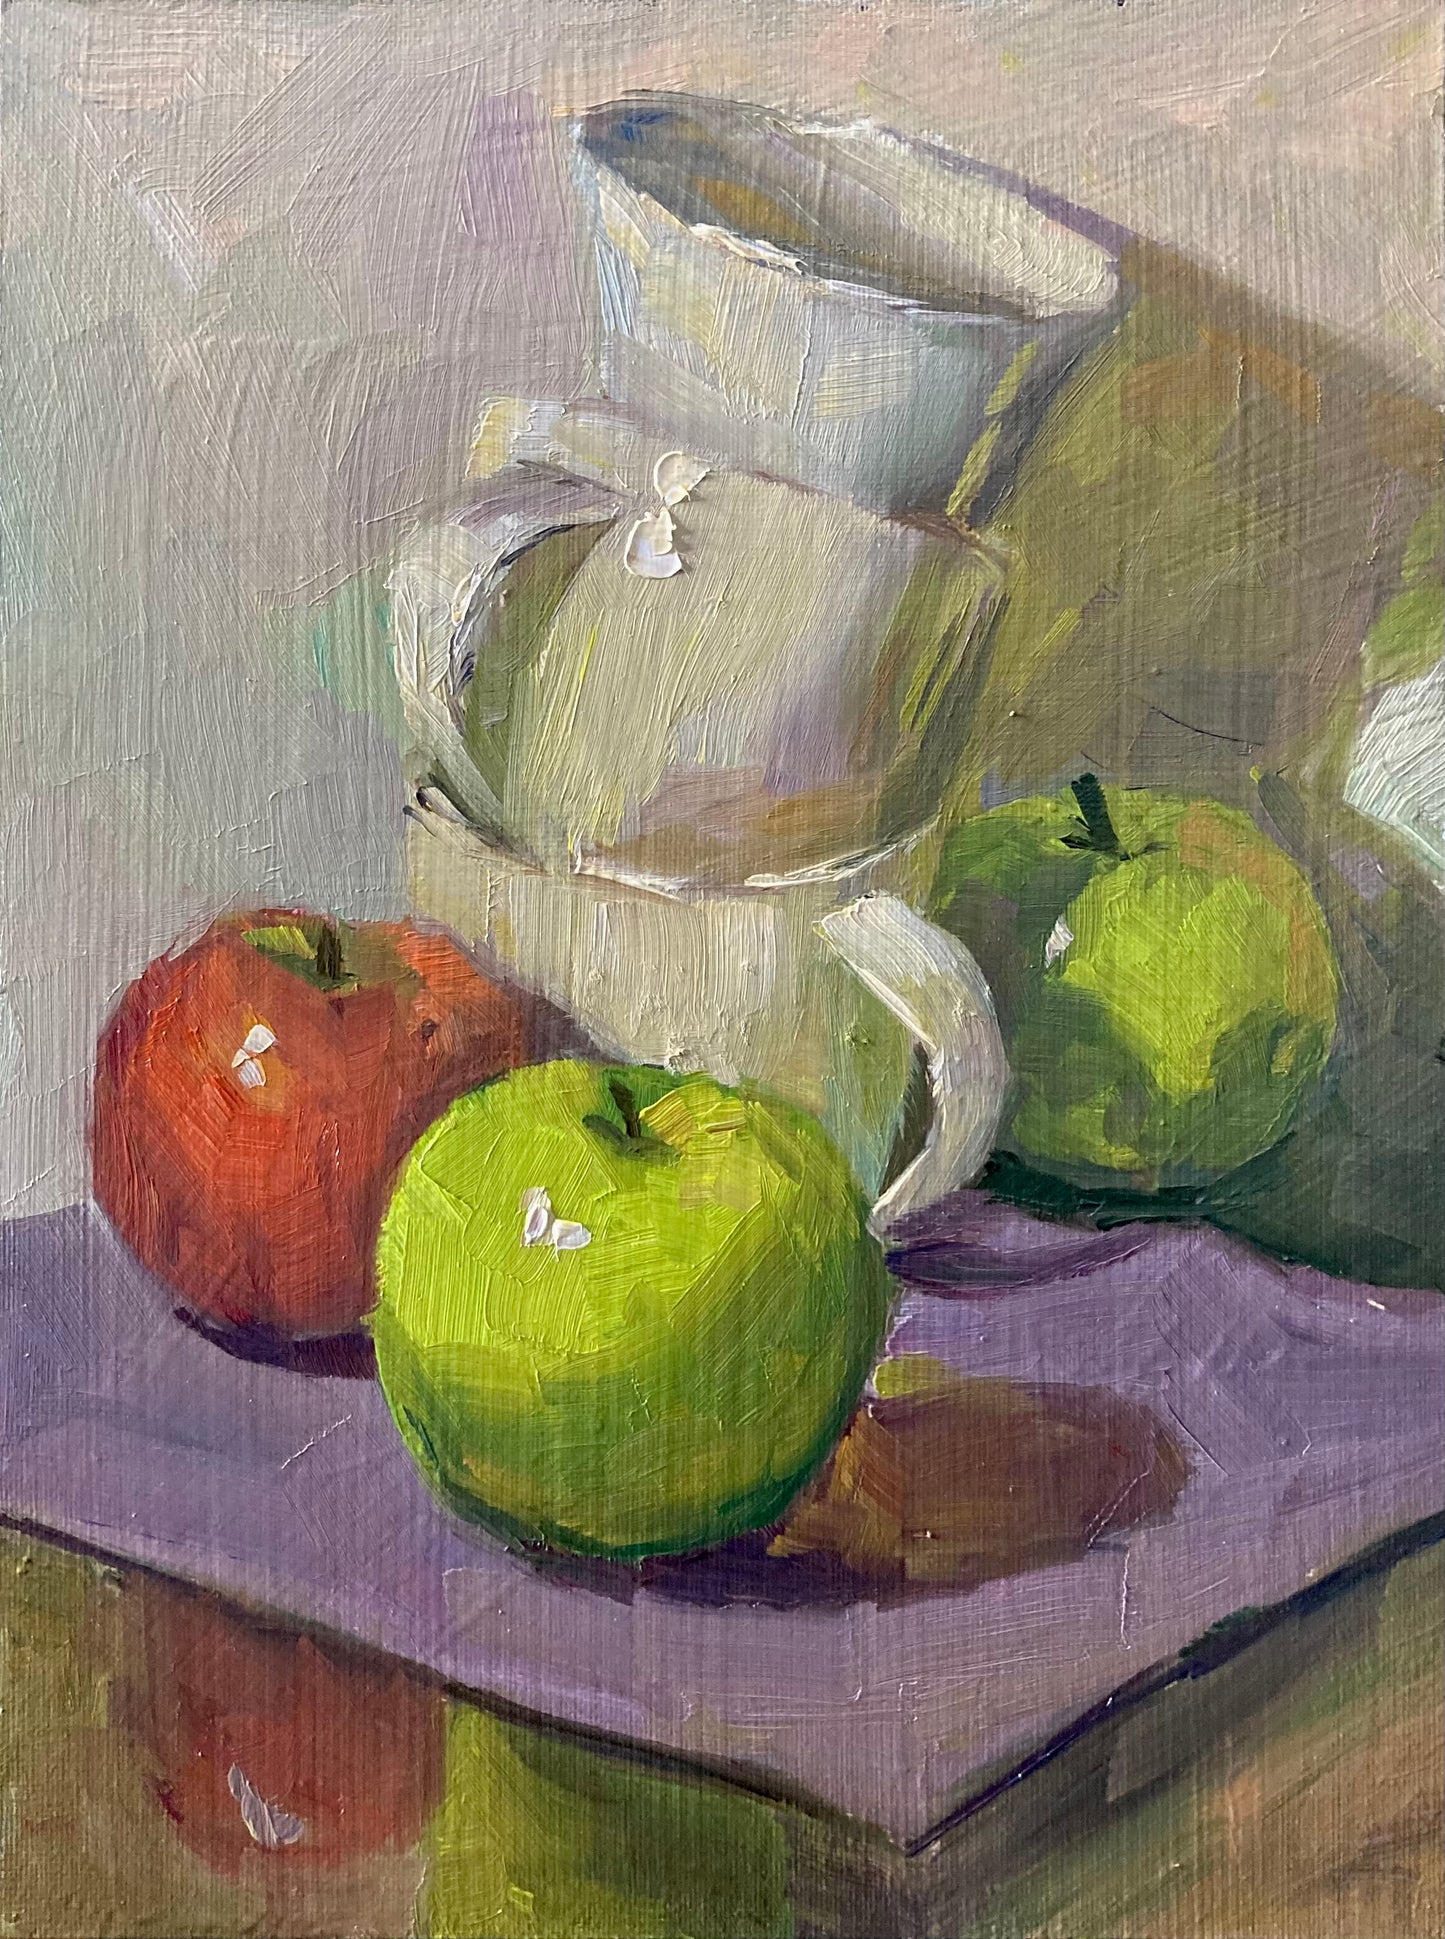 Green and Red Apples 2 - Small Original Oil Painting